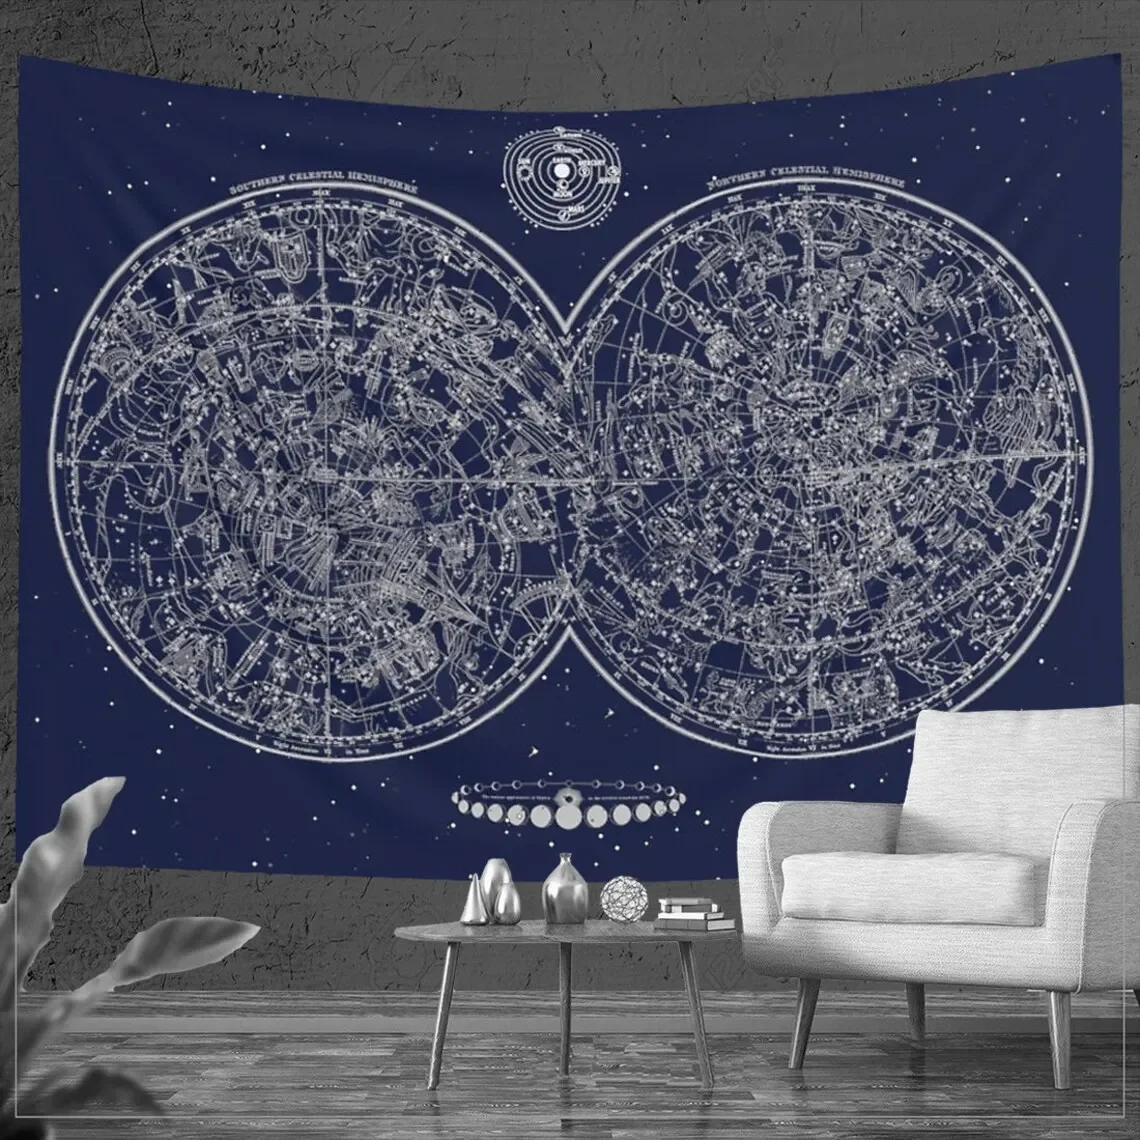 

Psychedelic History Continent Galaxy Map Tapestry Wall Hanging Black Sky Witchcraft Artistic Tapestry Carpet Mat Room Wall Decor